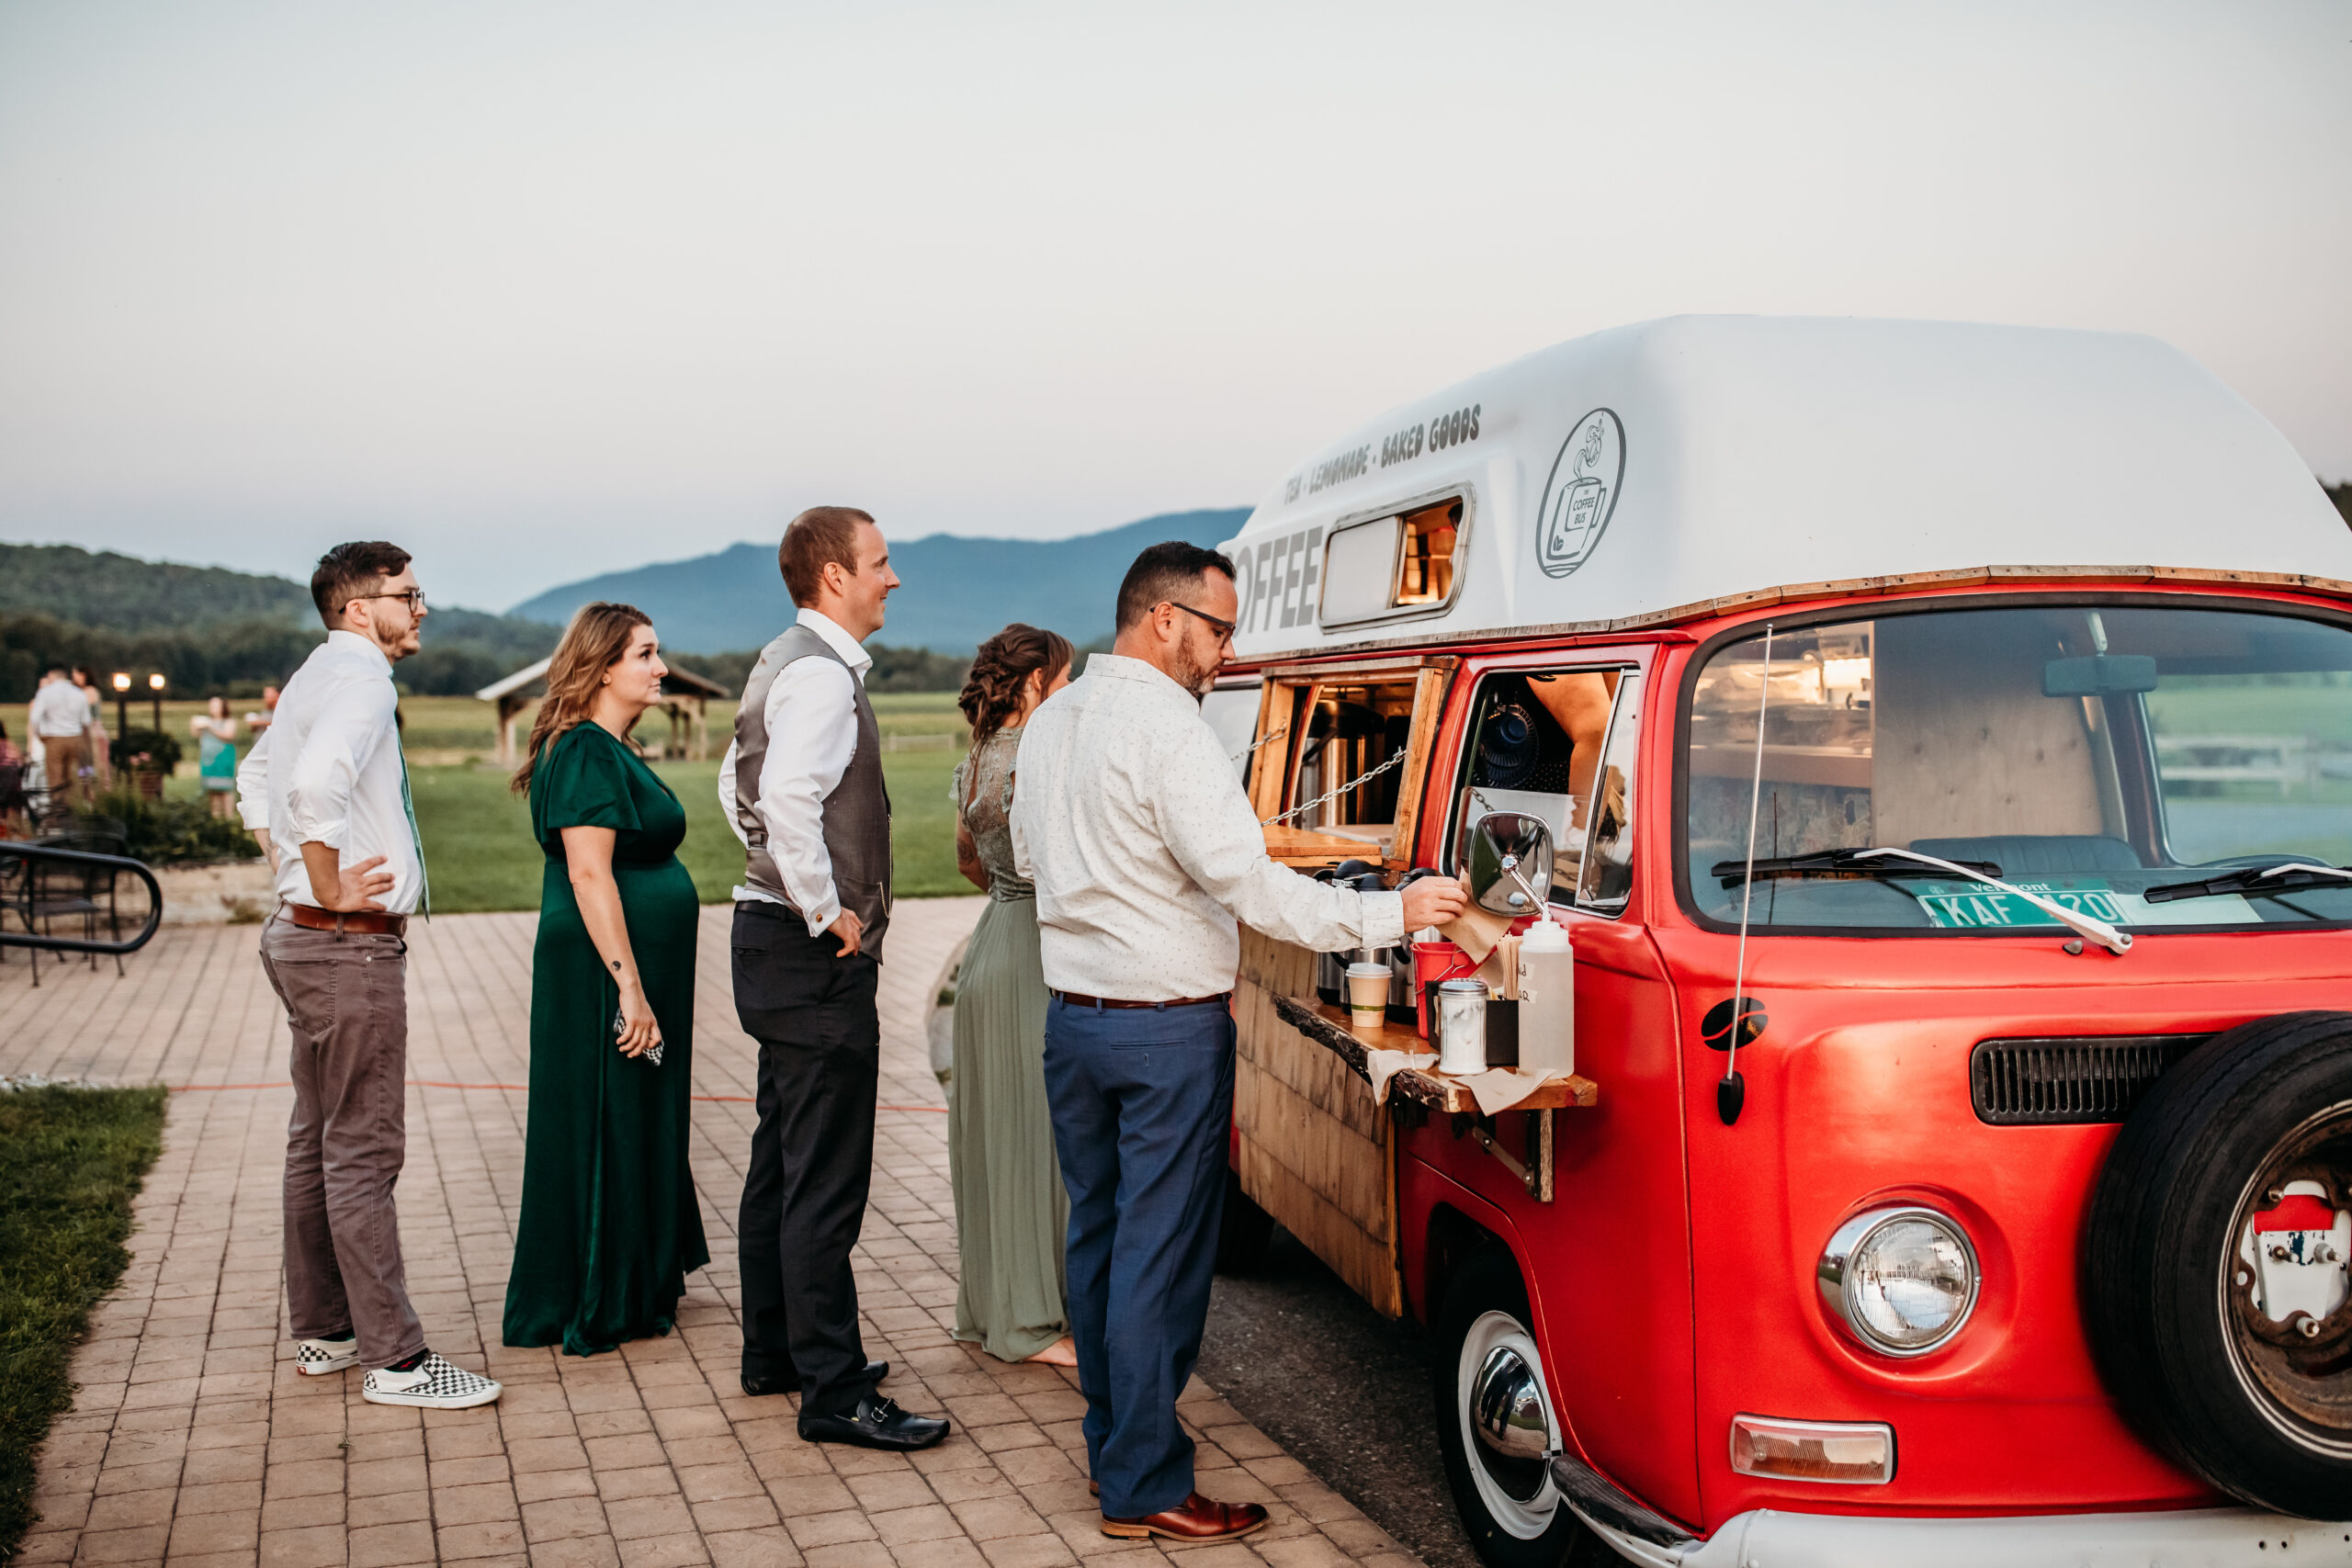 The Meef's Coffee Bus serving guests outside at the farmers market wedding reception